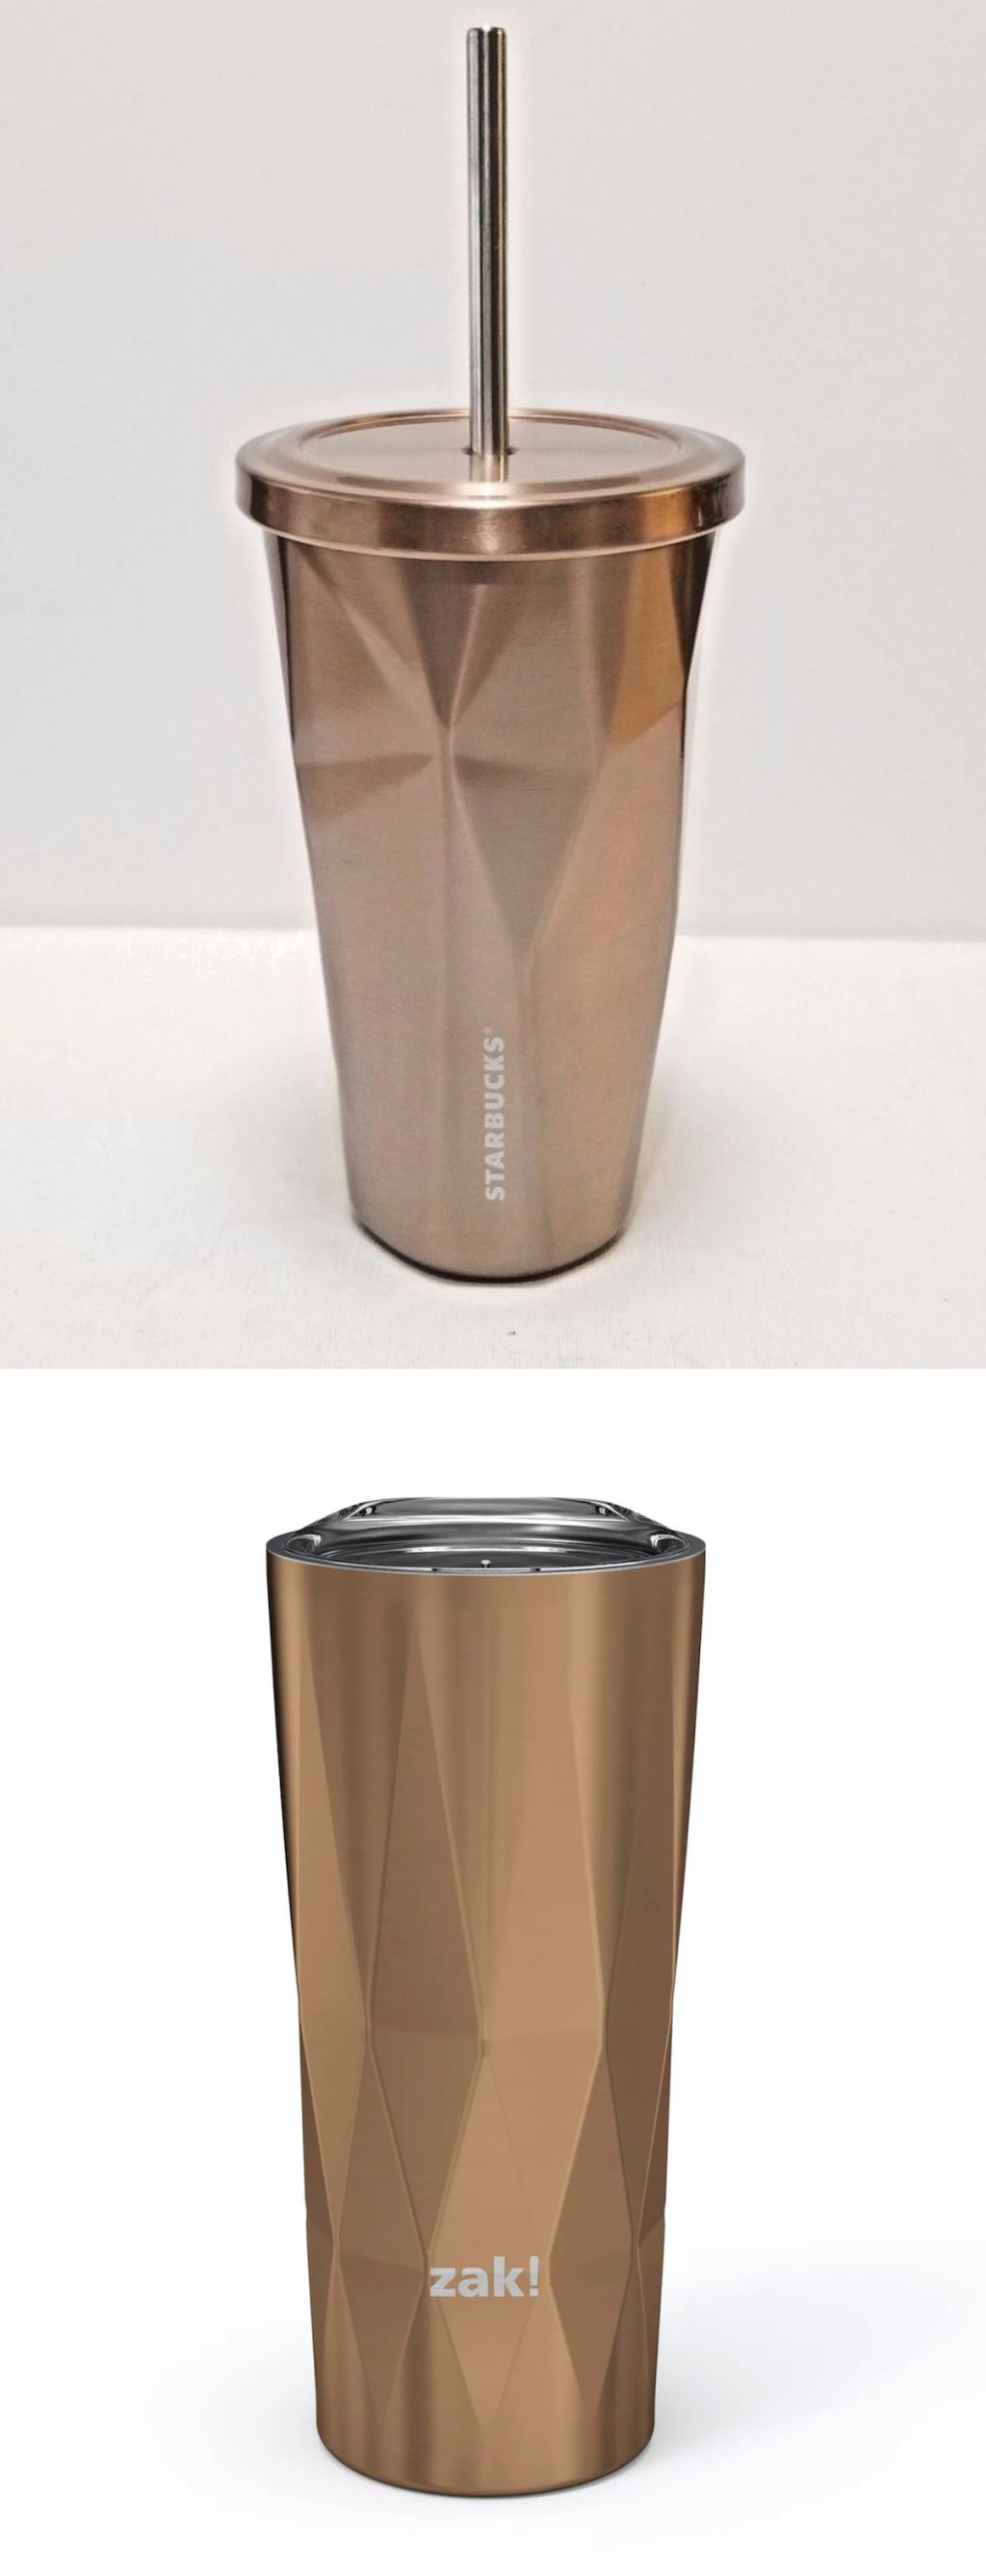 comparison of two gold metallic tumblers